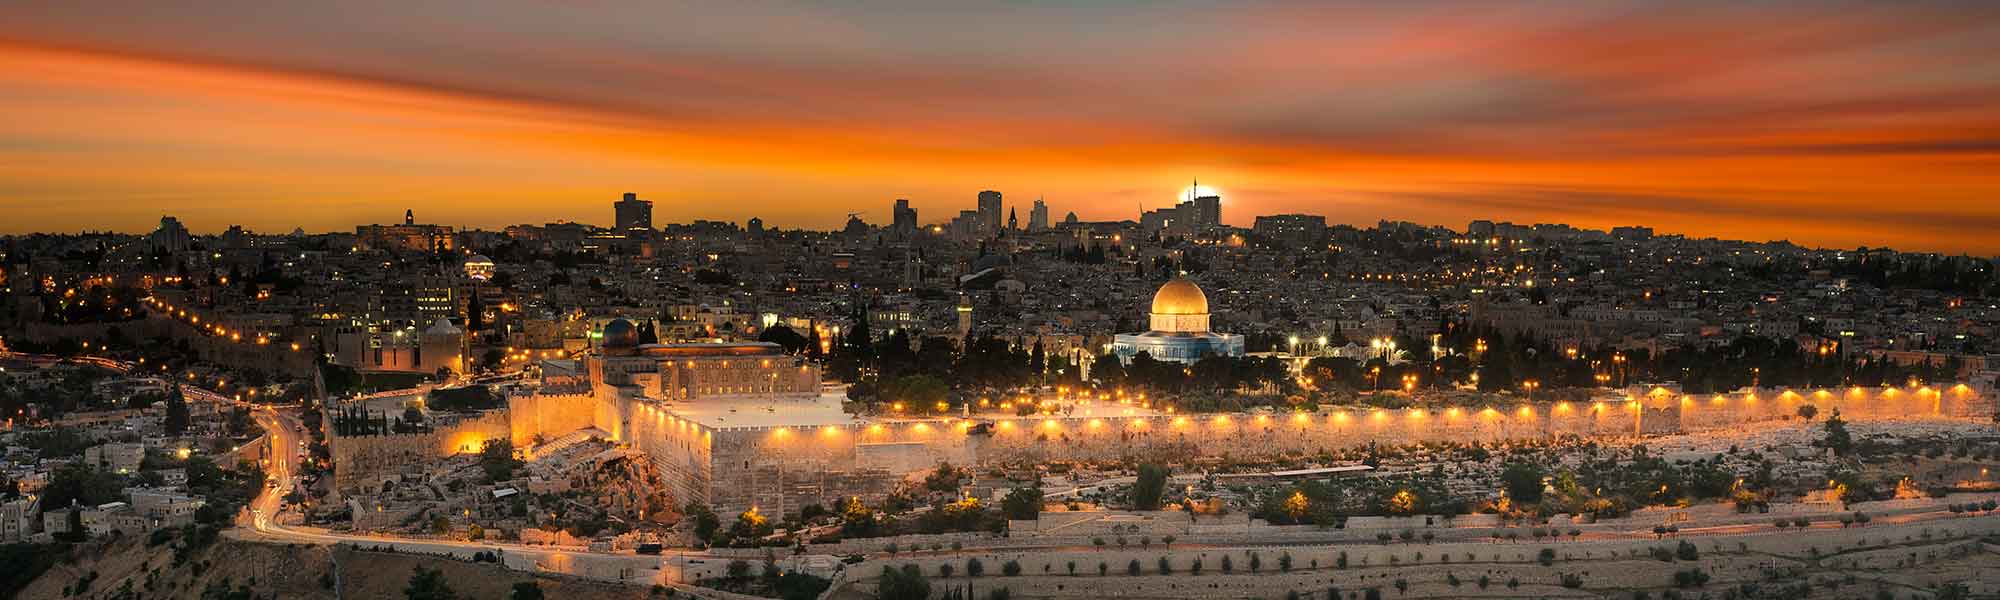 View to Jerusalem old city at sunset - Israel